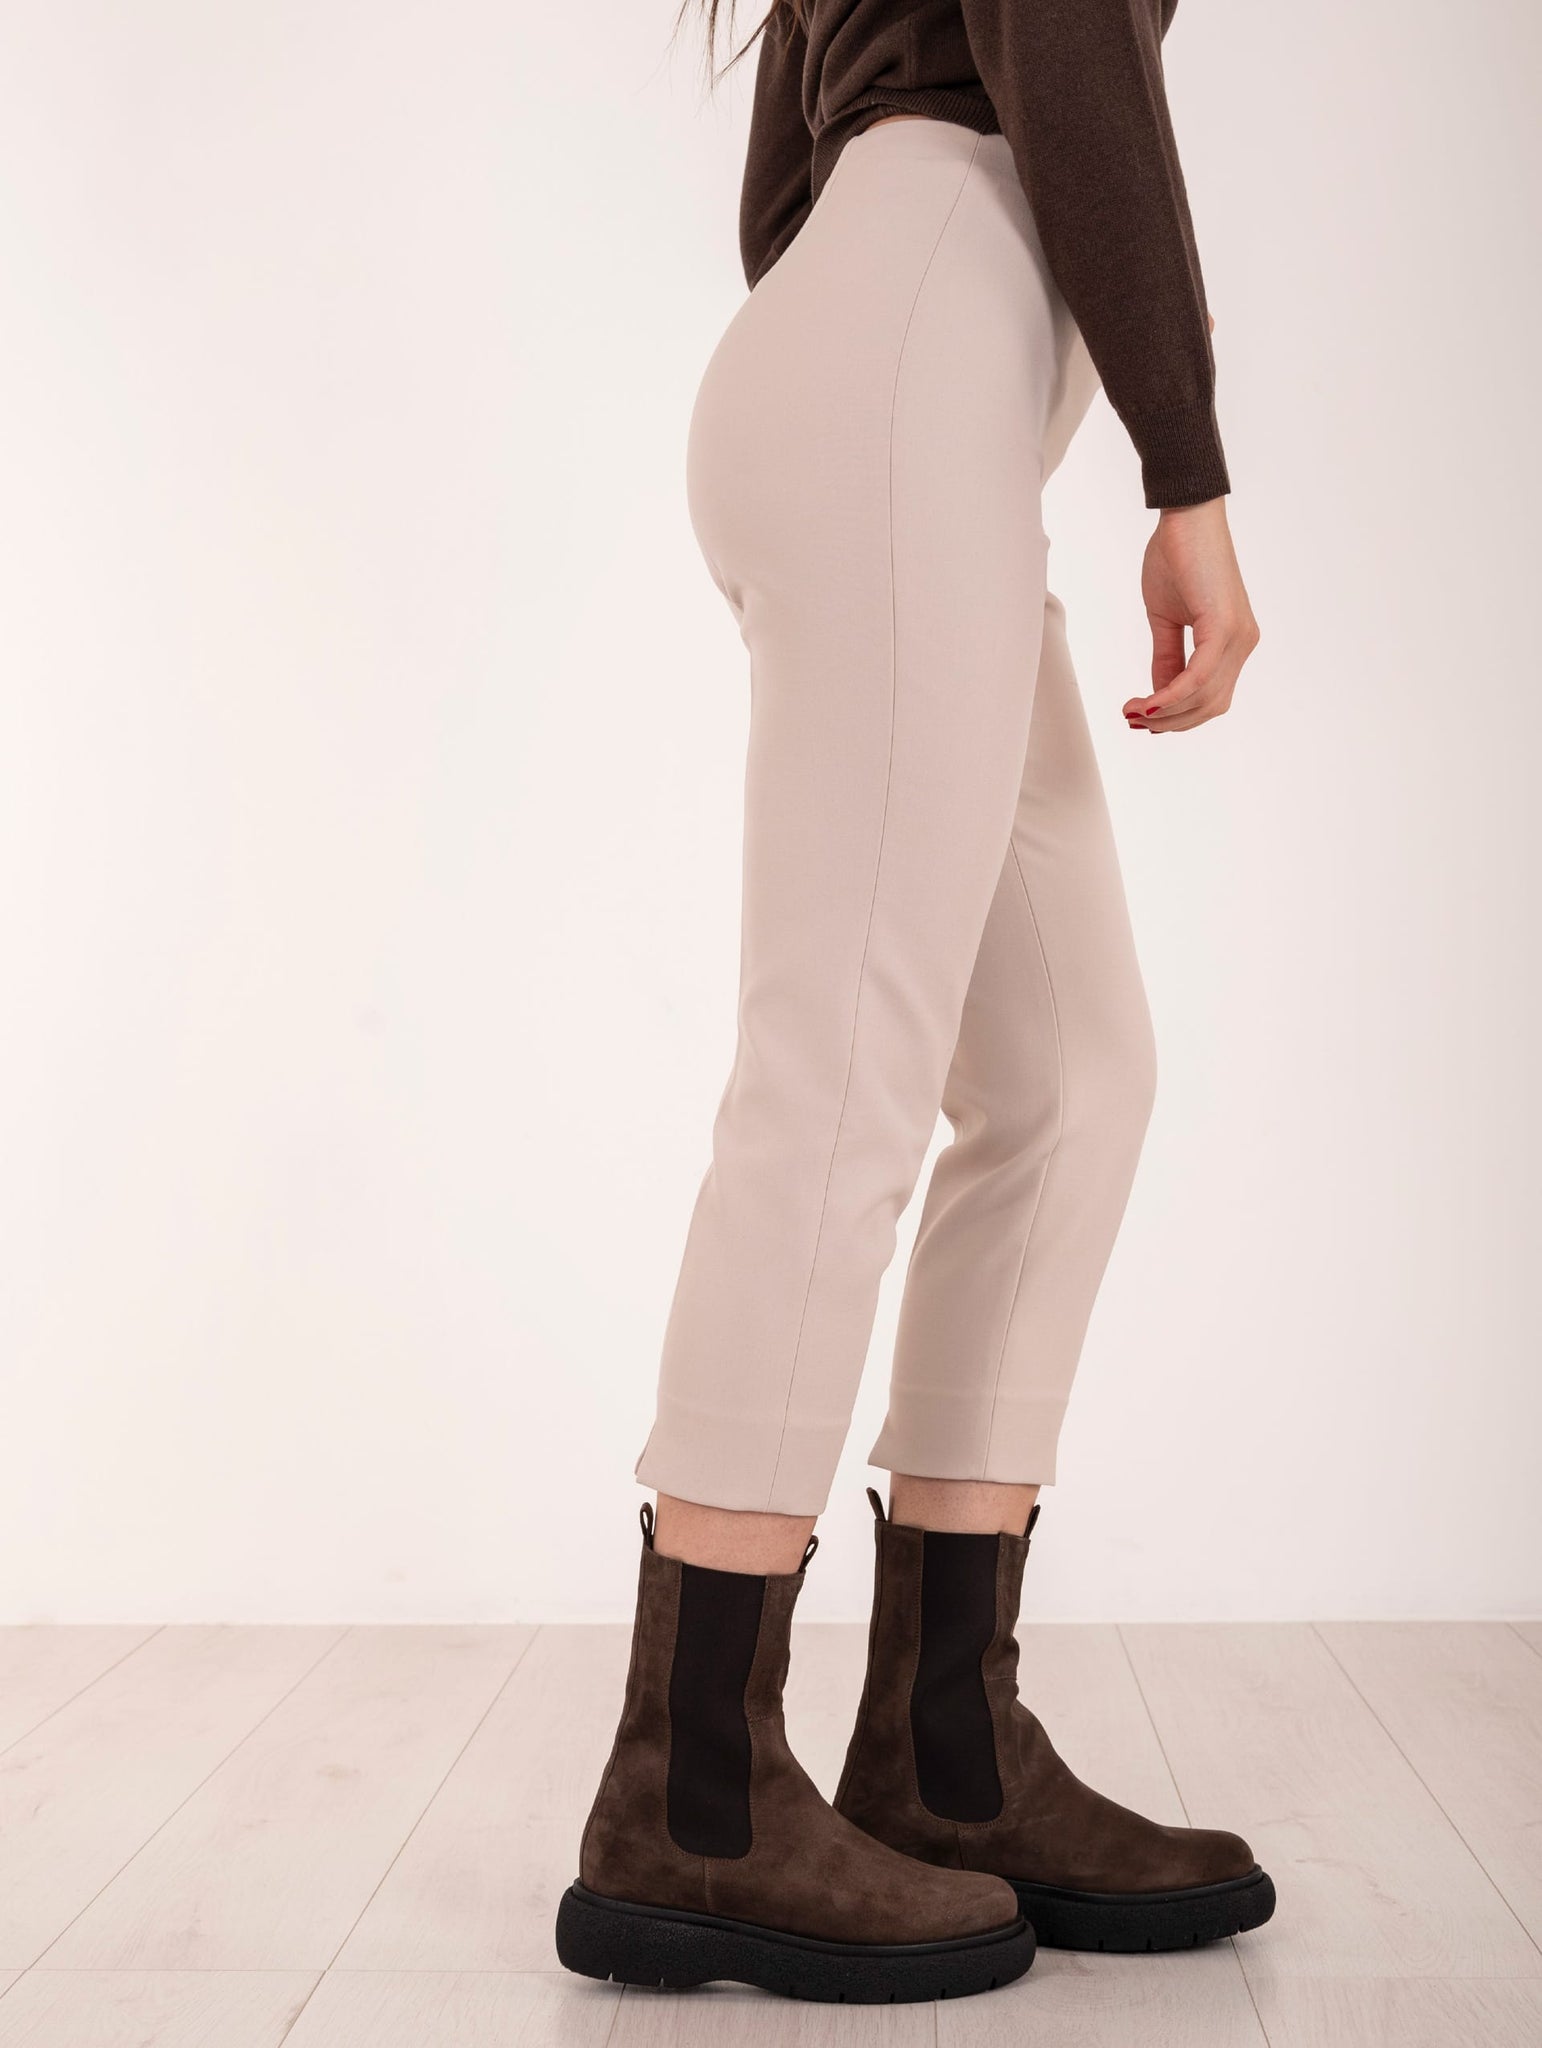 Pantalone Peserico a Sigaretta in Tela Double Bistretch Marmo